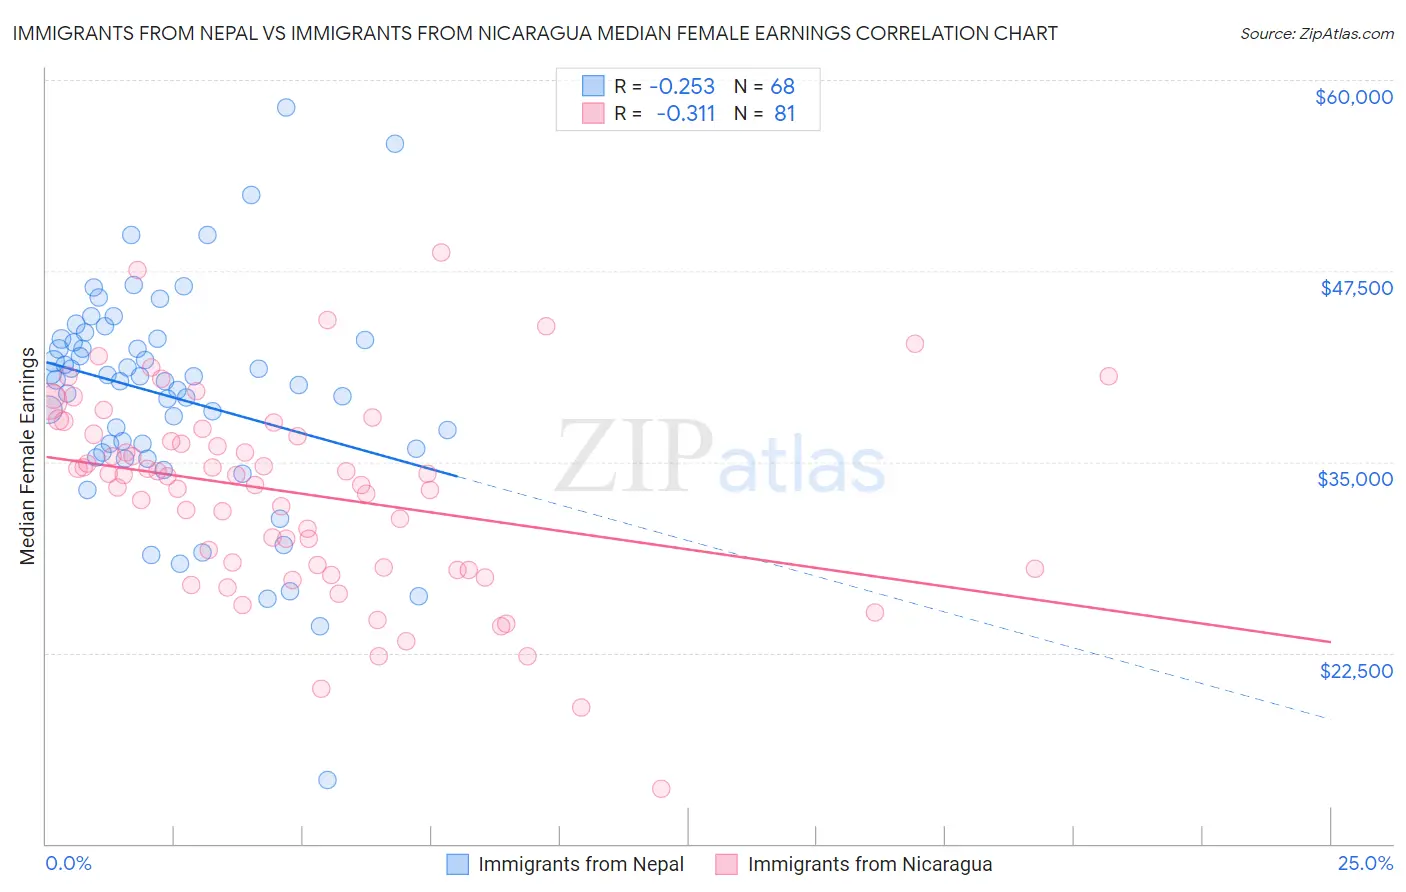 Immigrants from Nepal vs Immigrants from Nicaragua Median Female Earnings